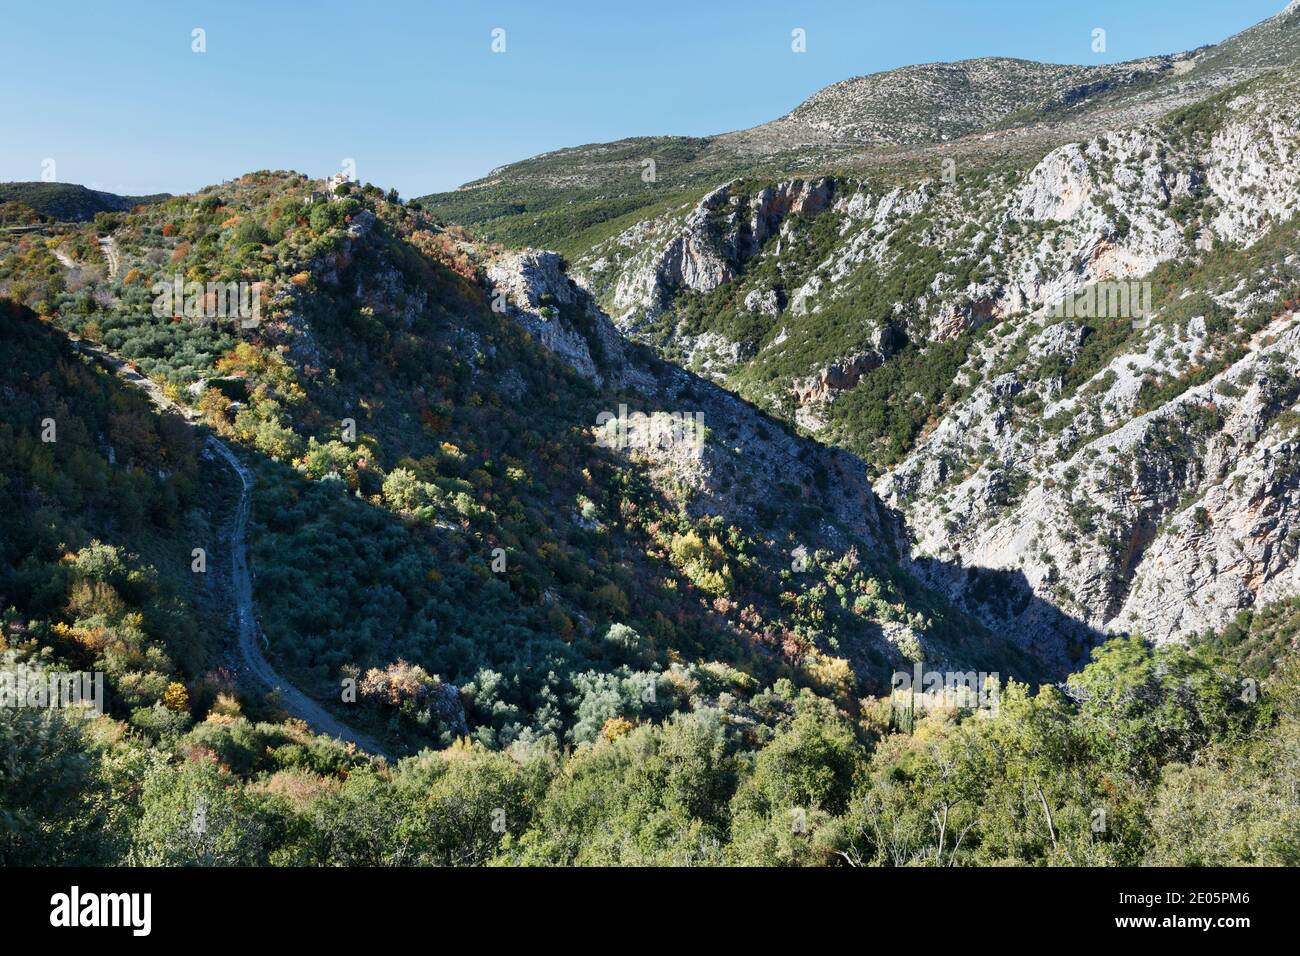 Profitis Ilias Monastery on the rim of the Rindomo Gorge in the Mani of Greece with Altomira village in the distance Stock Photo